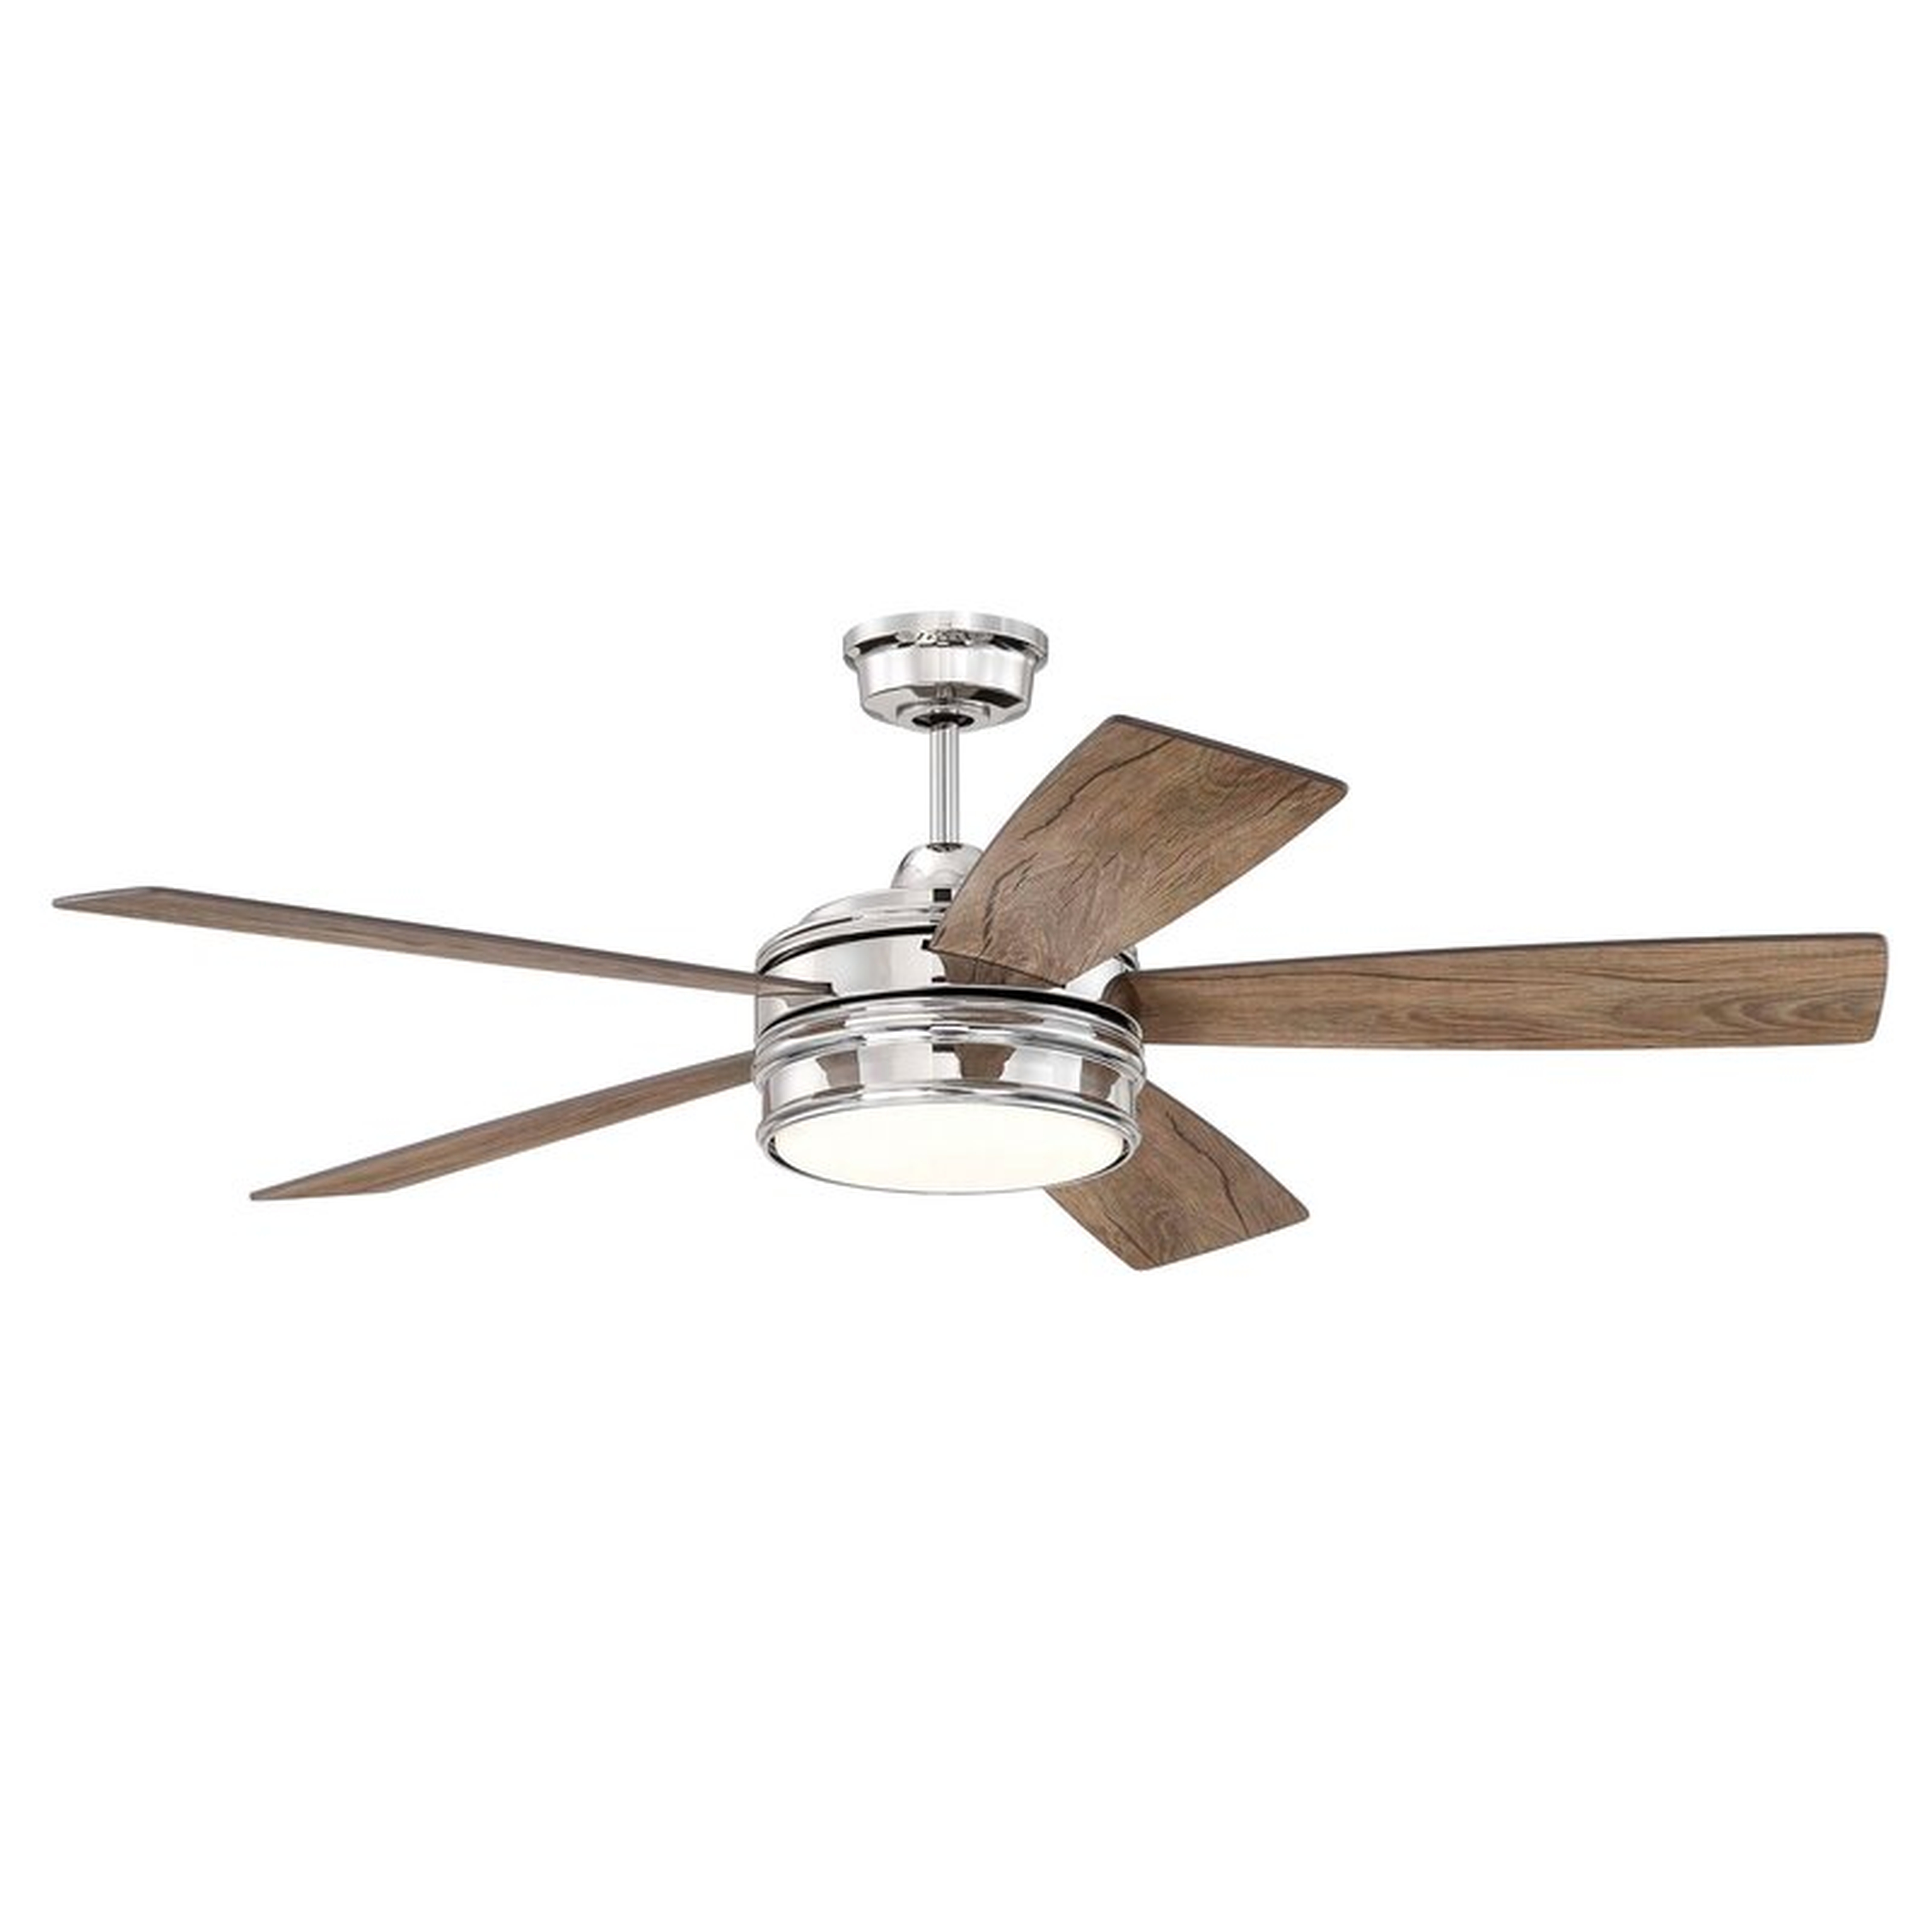 52" Winchcombe 5 - Blade LED Standard Ceiling Fan with Remote Control and Light Kit Included - Birch Lane